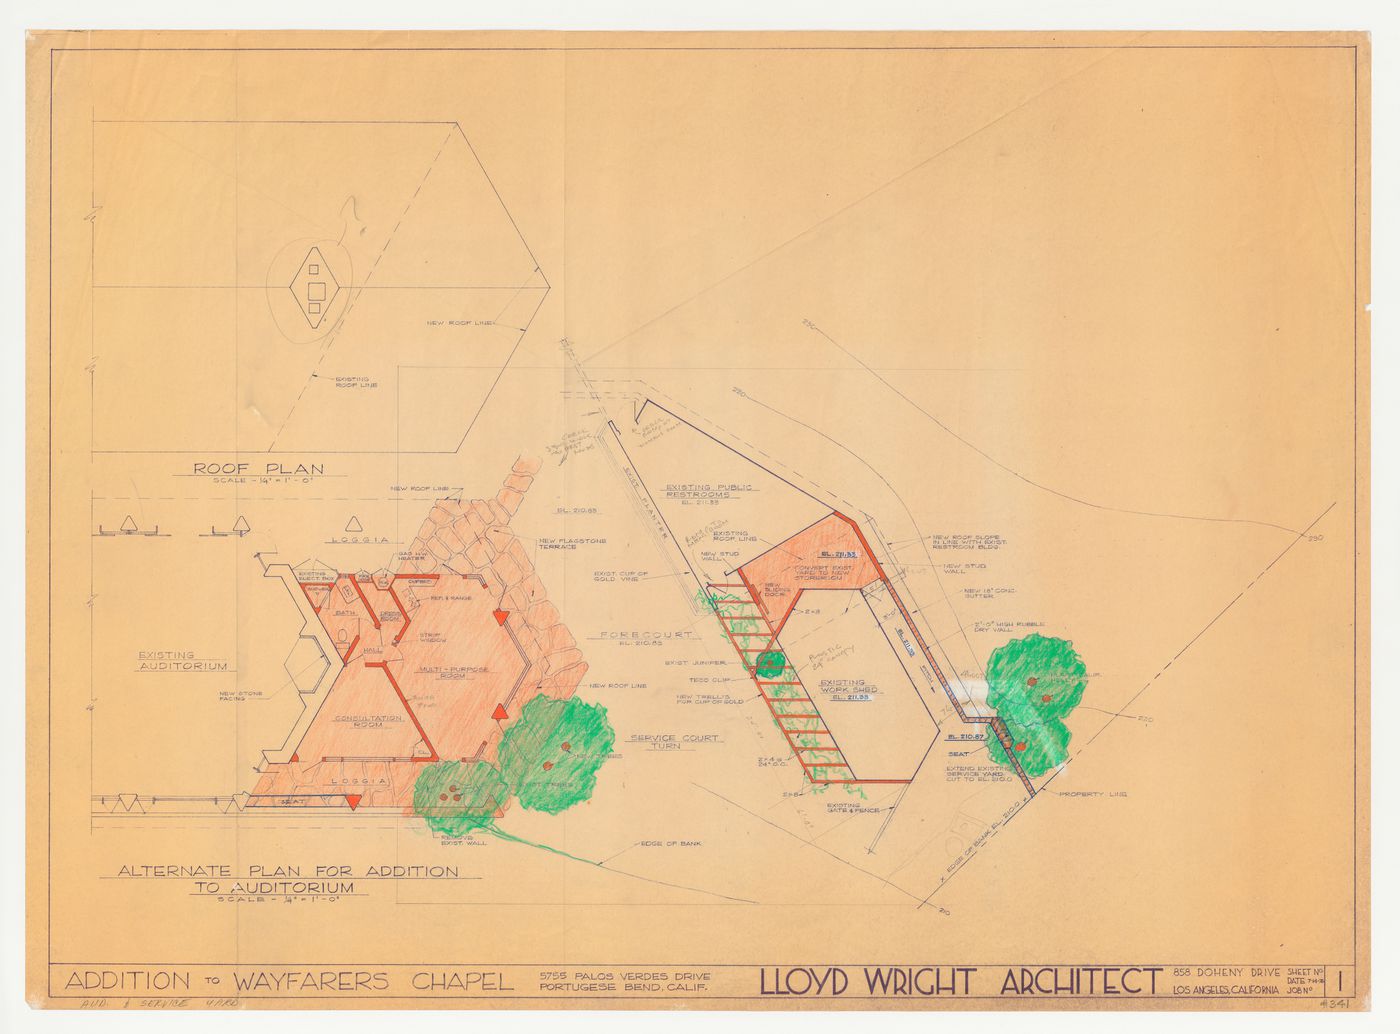 Wayfarers' Chapel, Palos Verdes, California: Partial site plan showing the auditorium addition and the conversion of the yard between the work shed and rest rooms into a storage area